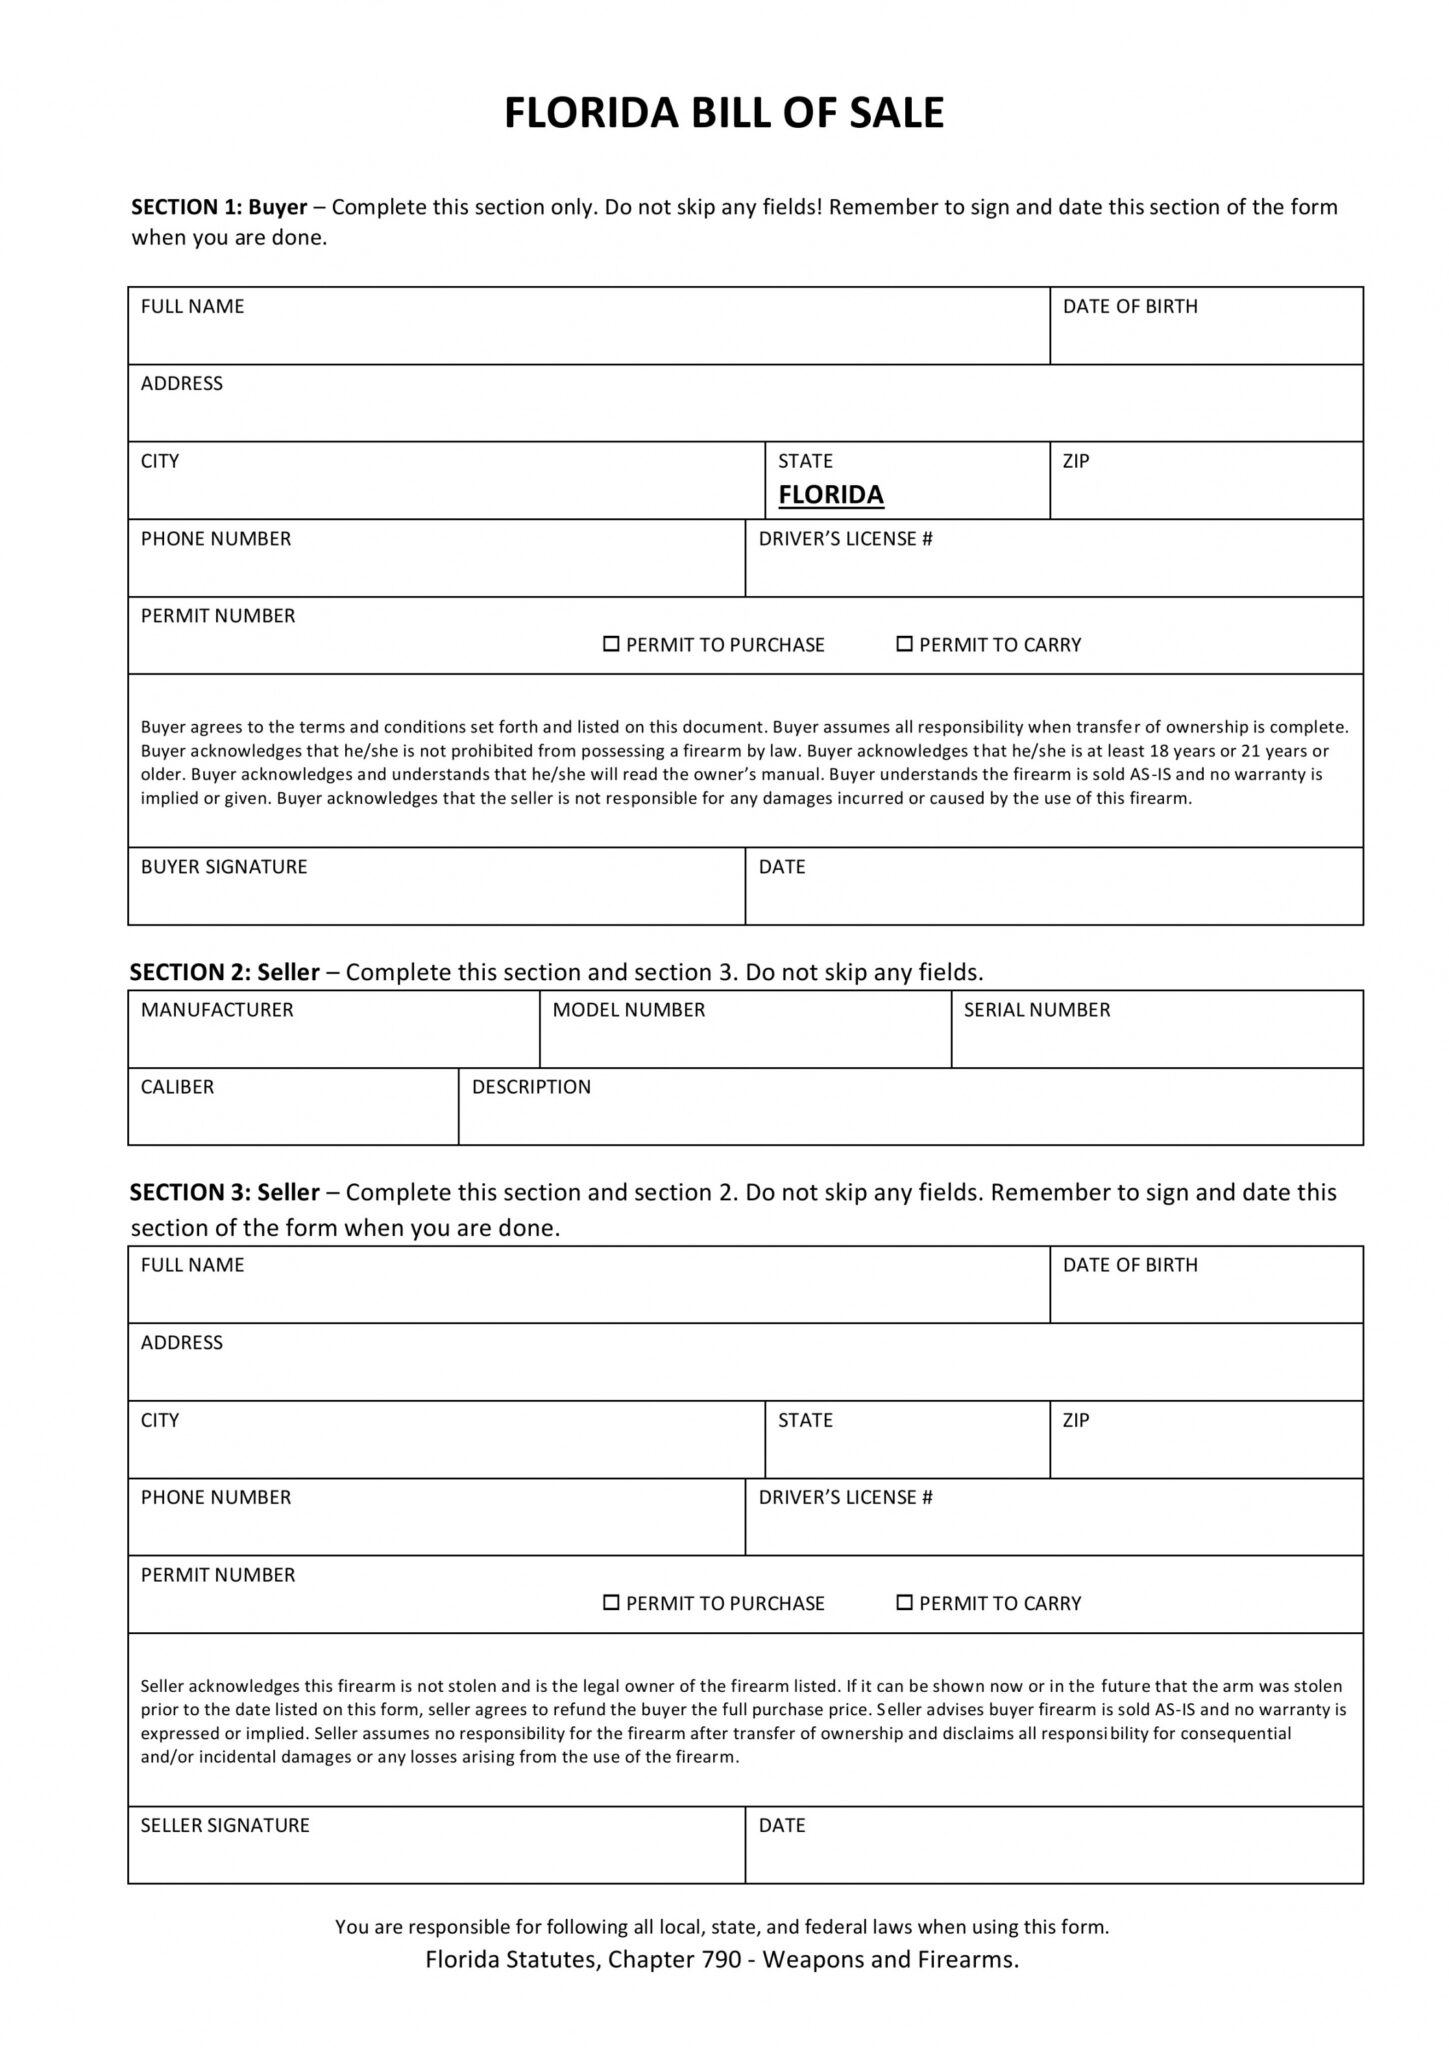 bill-of-sale-virginia-template-fill-online-printable-fillable